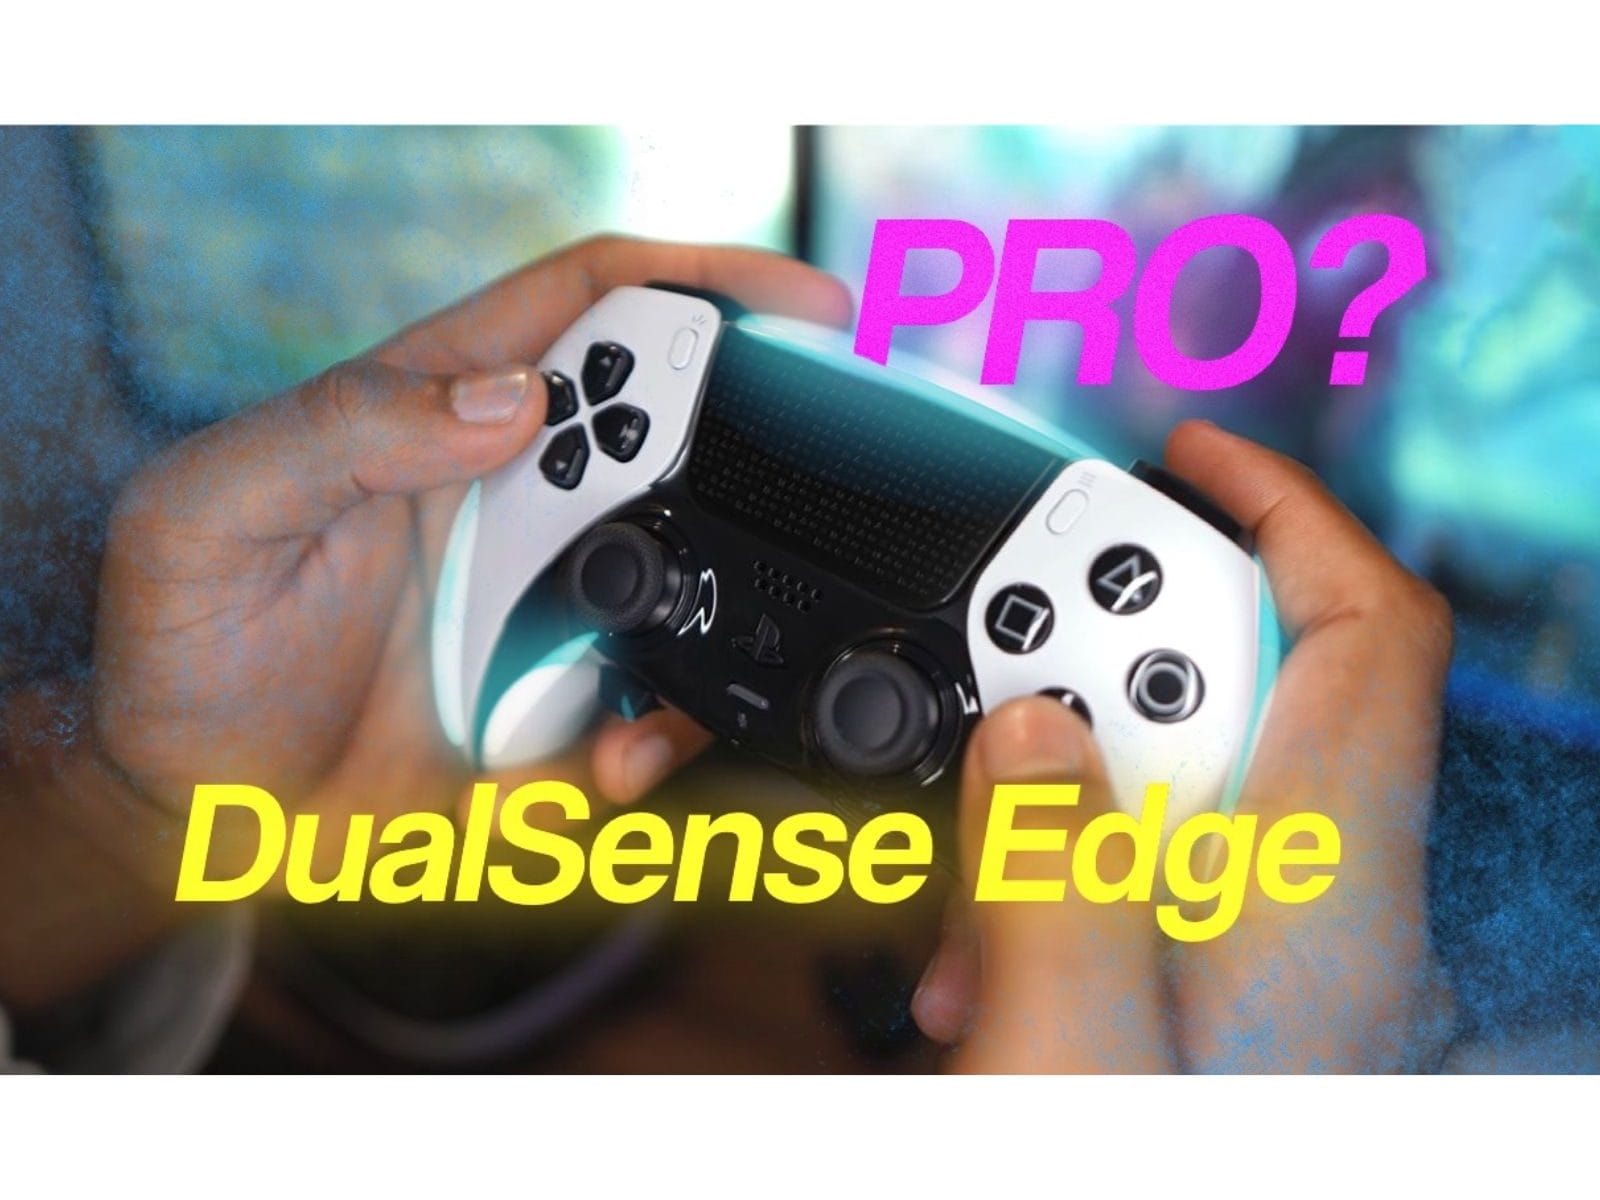 PS5 DualSense Edge Controller price: here's how much Sony's pro